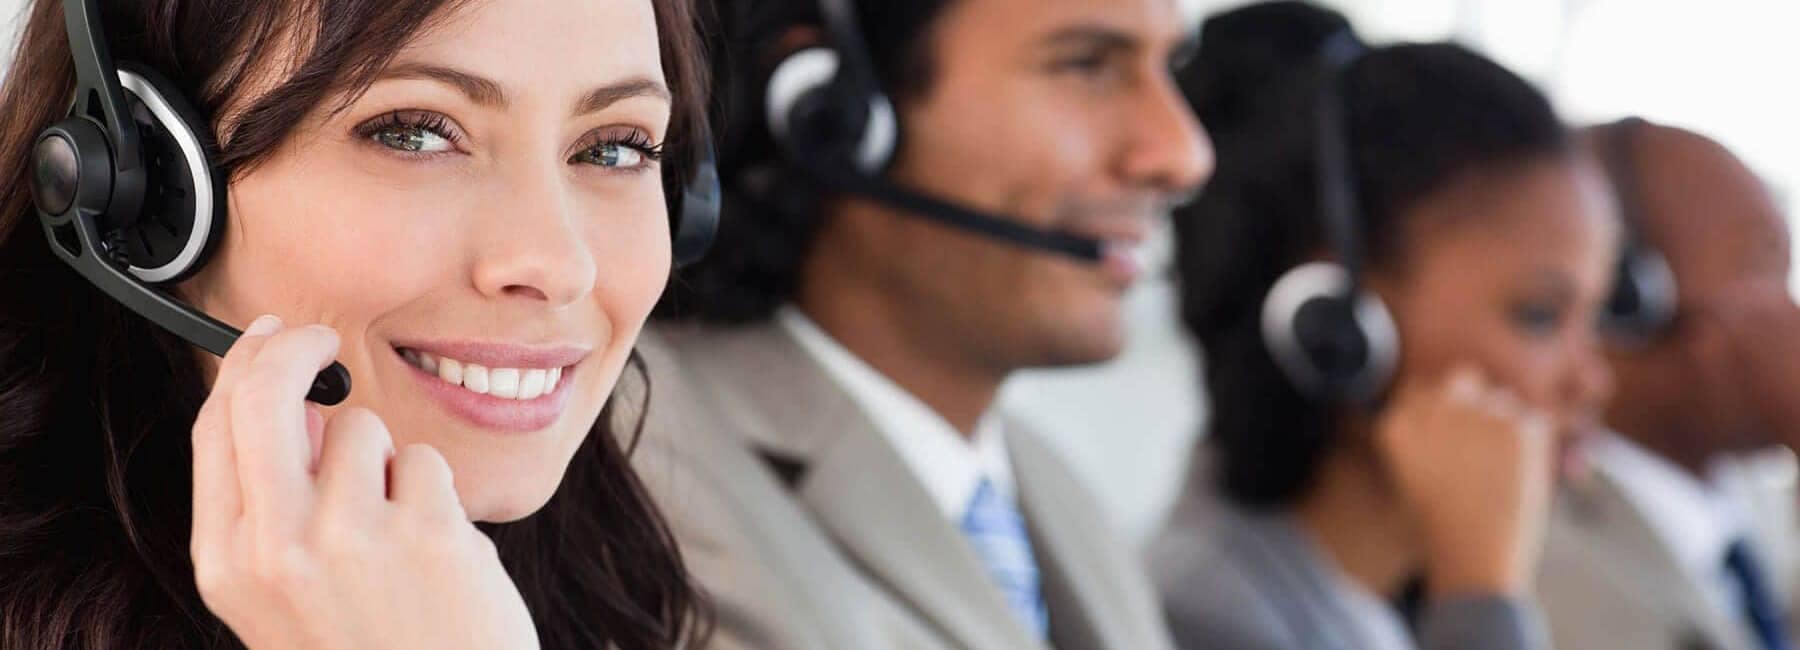 Customer Service People with Headsets